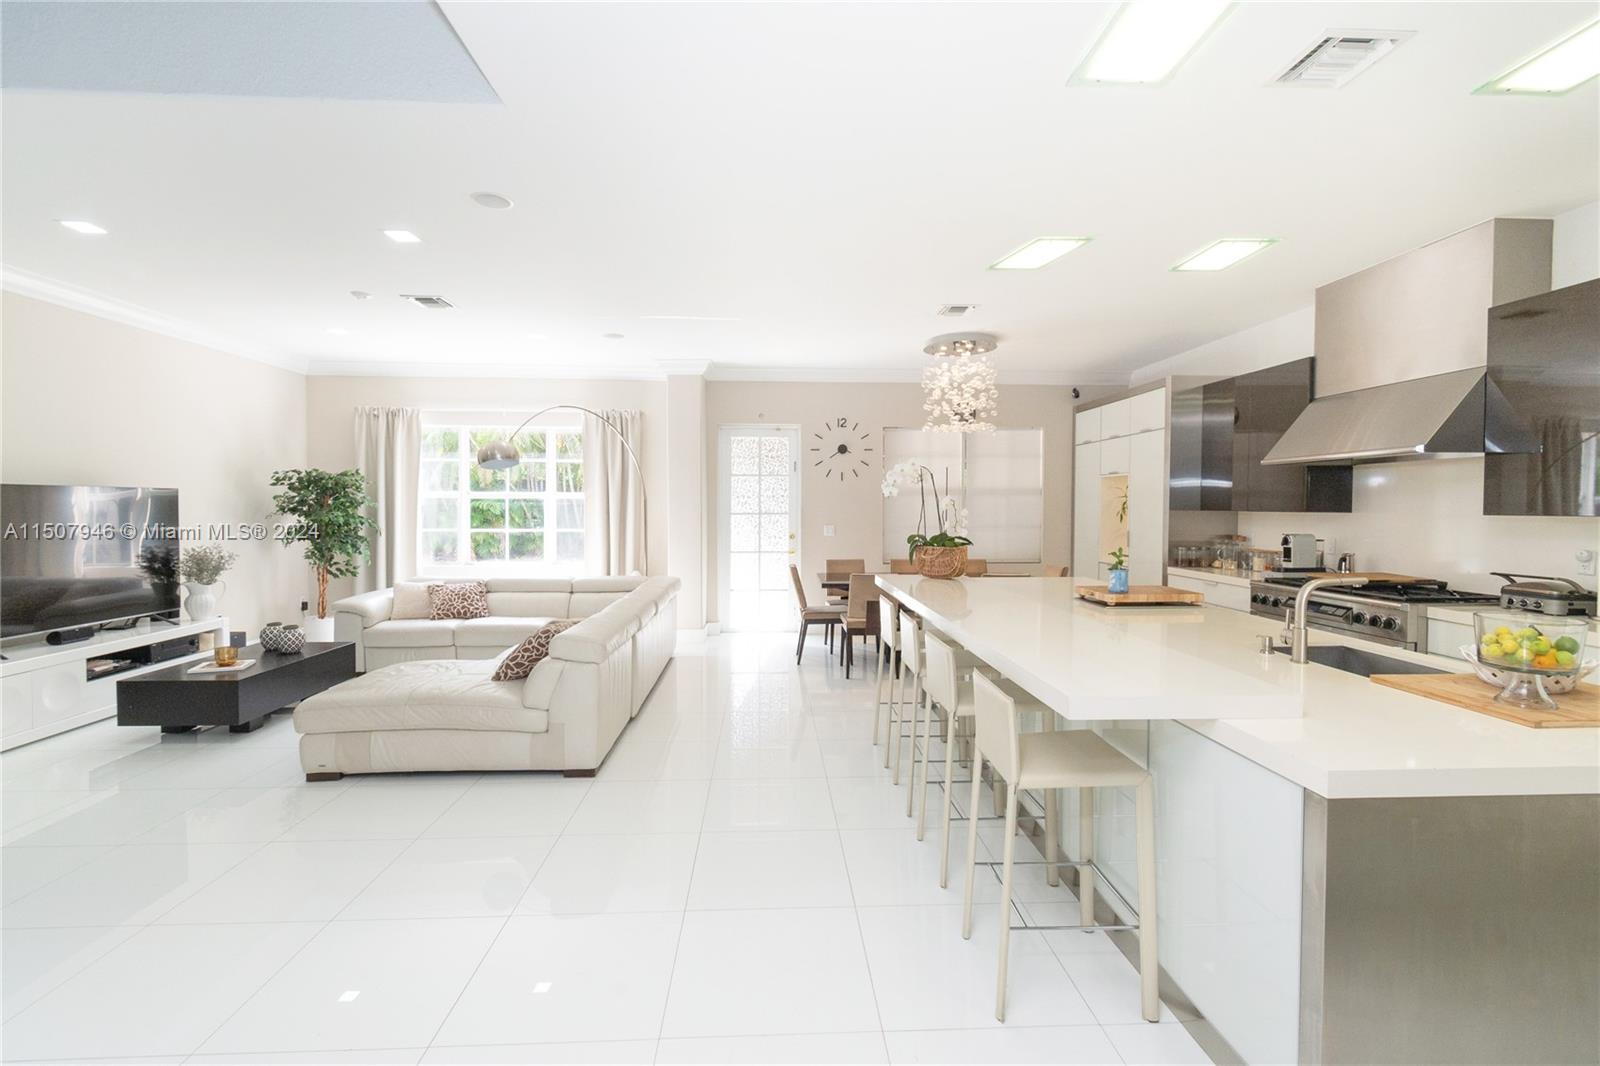 a large white kitchen with lots of counter space a sink appliances and a large window